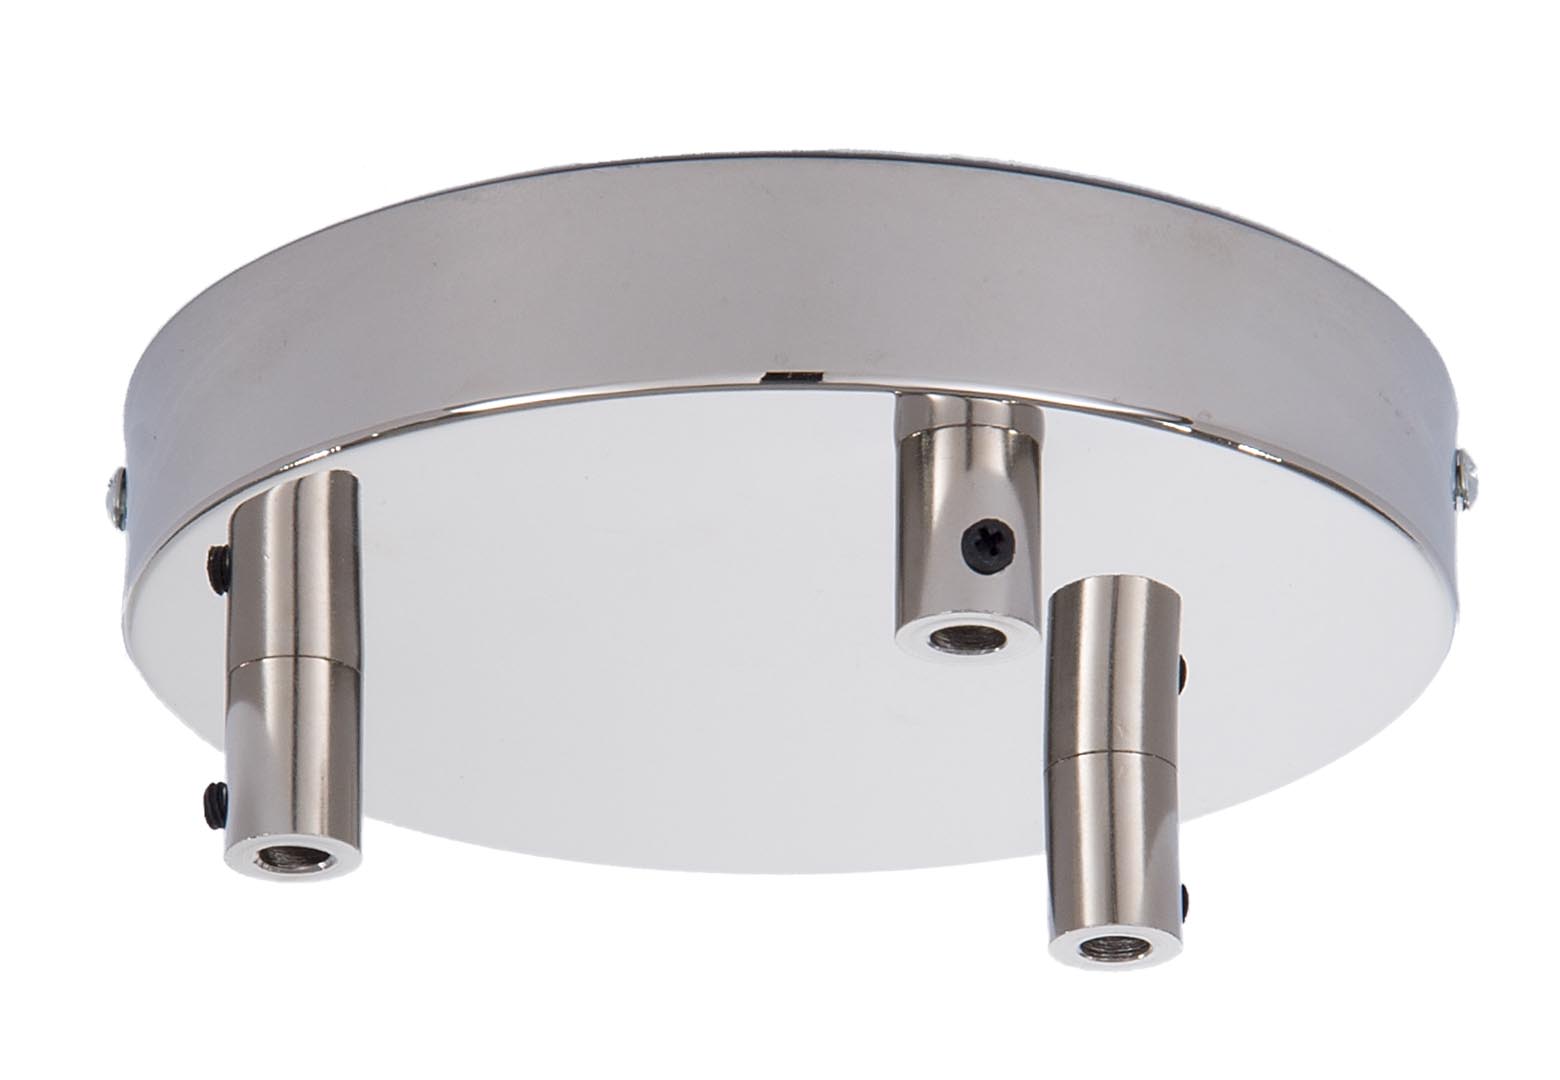 3-Port Lighting Canopy Canopy Kit with Nickel Plated Finish